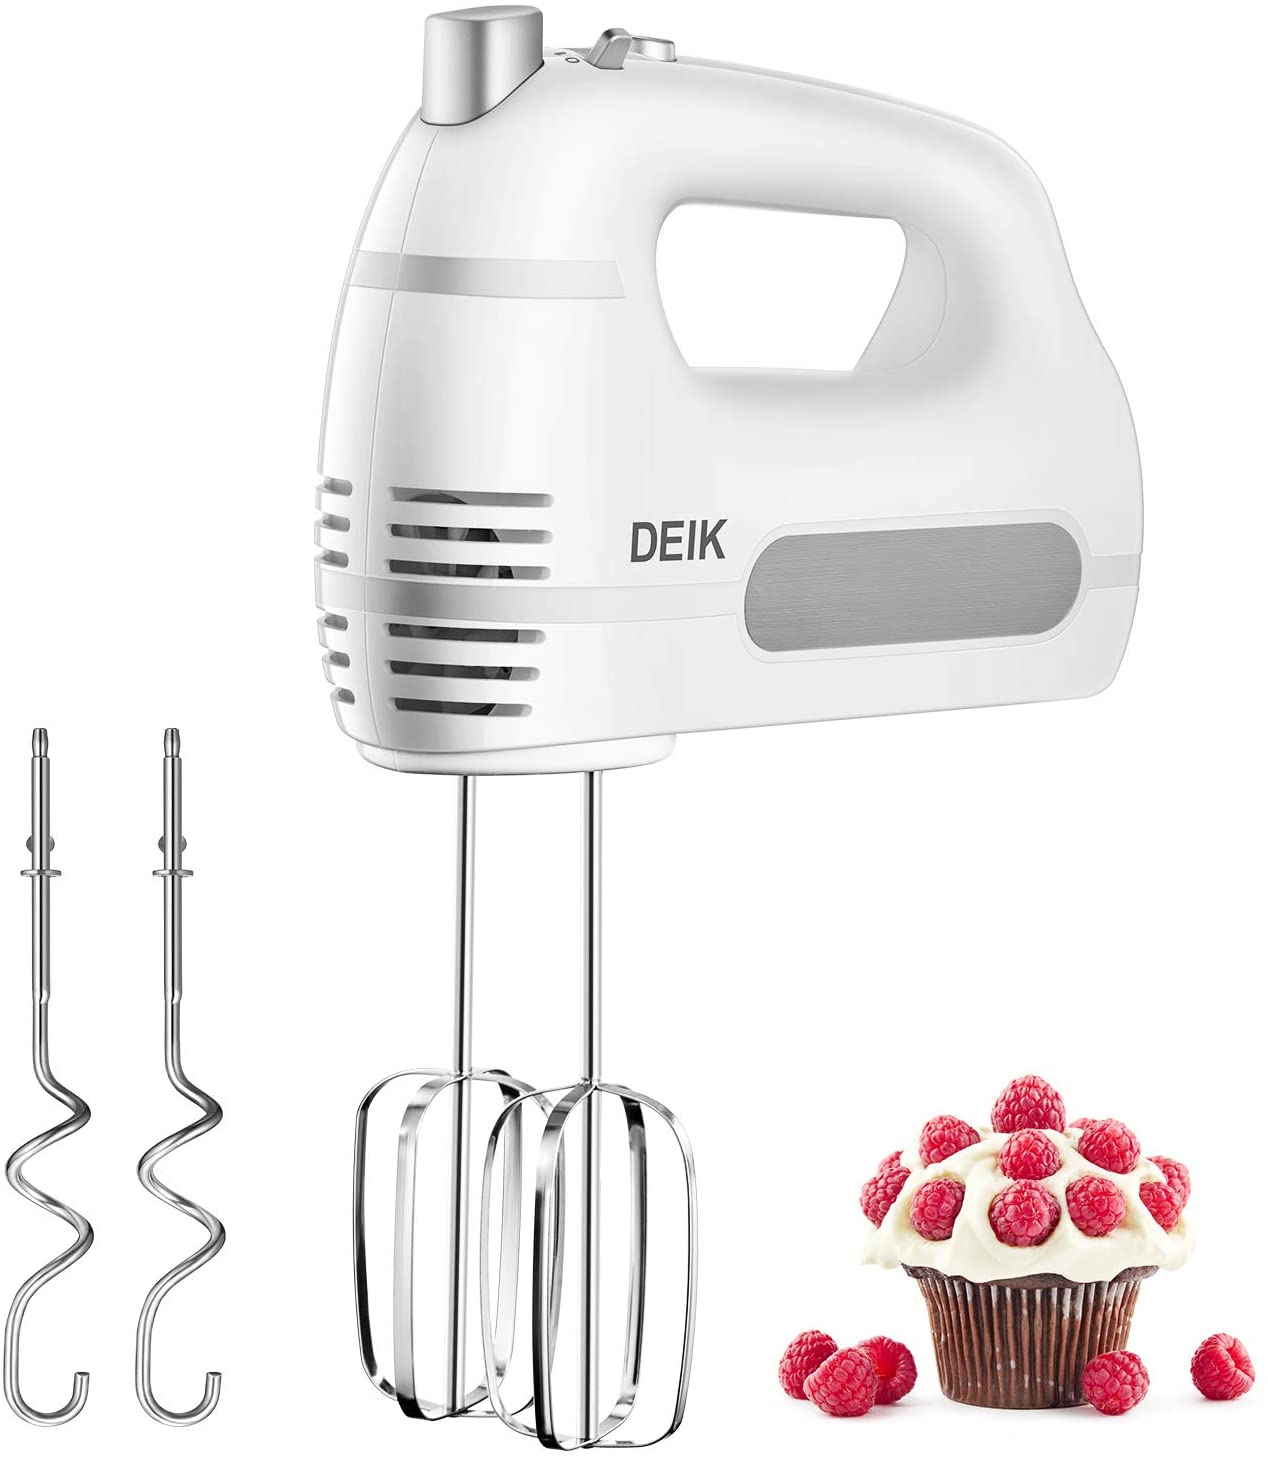 Deik | Electric Hand Mixer, 6-Speed 250W Hand Mixer Electric, Turbo Button, One Button Eject Design, White